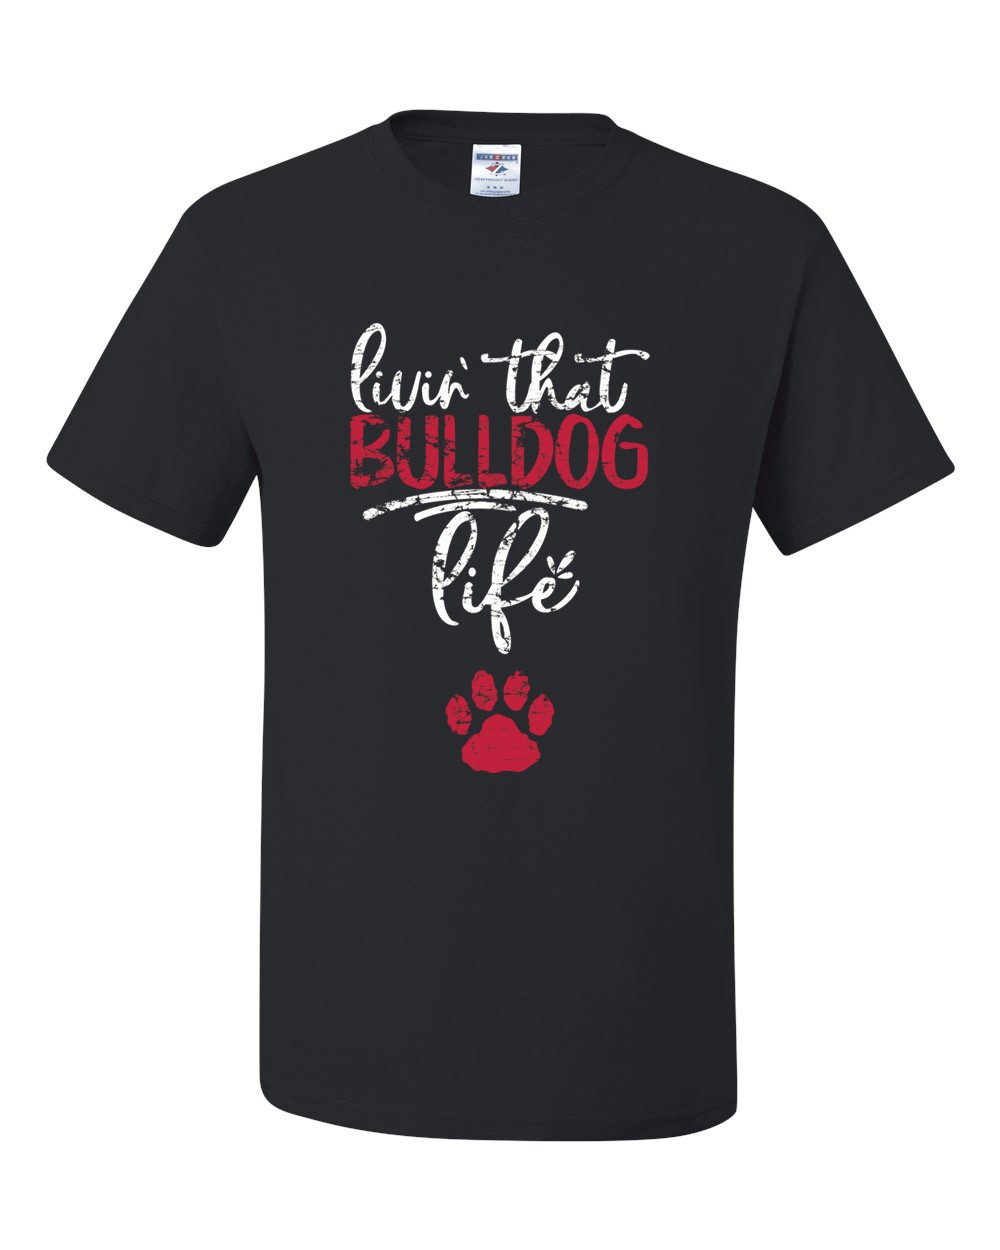 SAS S/S Spirit "Living that Bulldog Life" T-Shirt w/ Logo - Please Allow 2-3 Weeks for Delivery